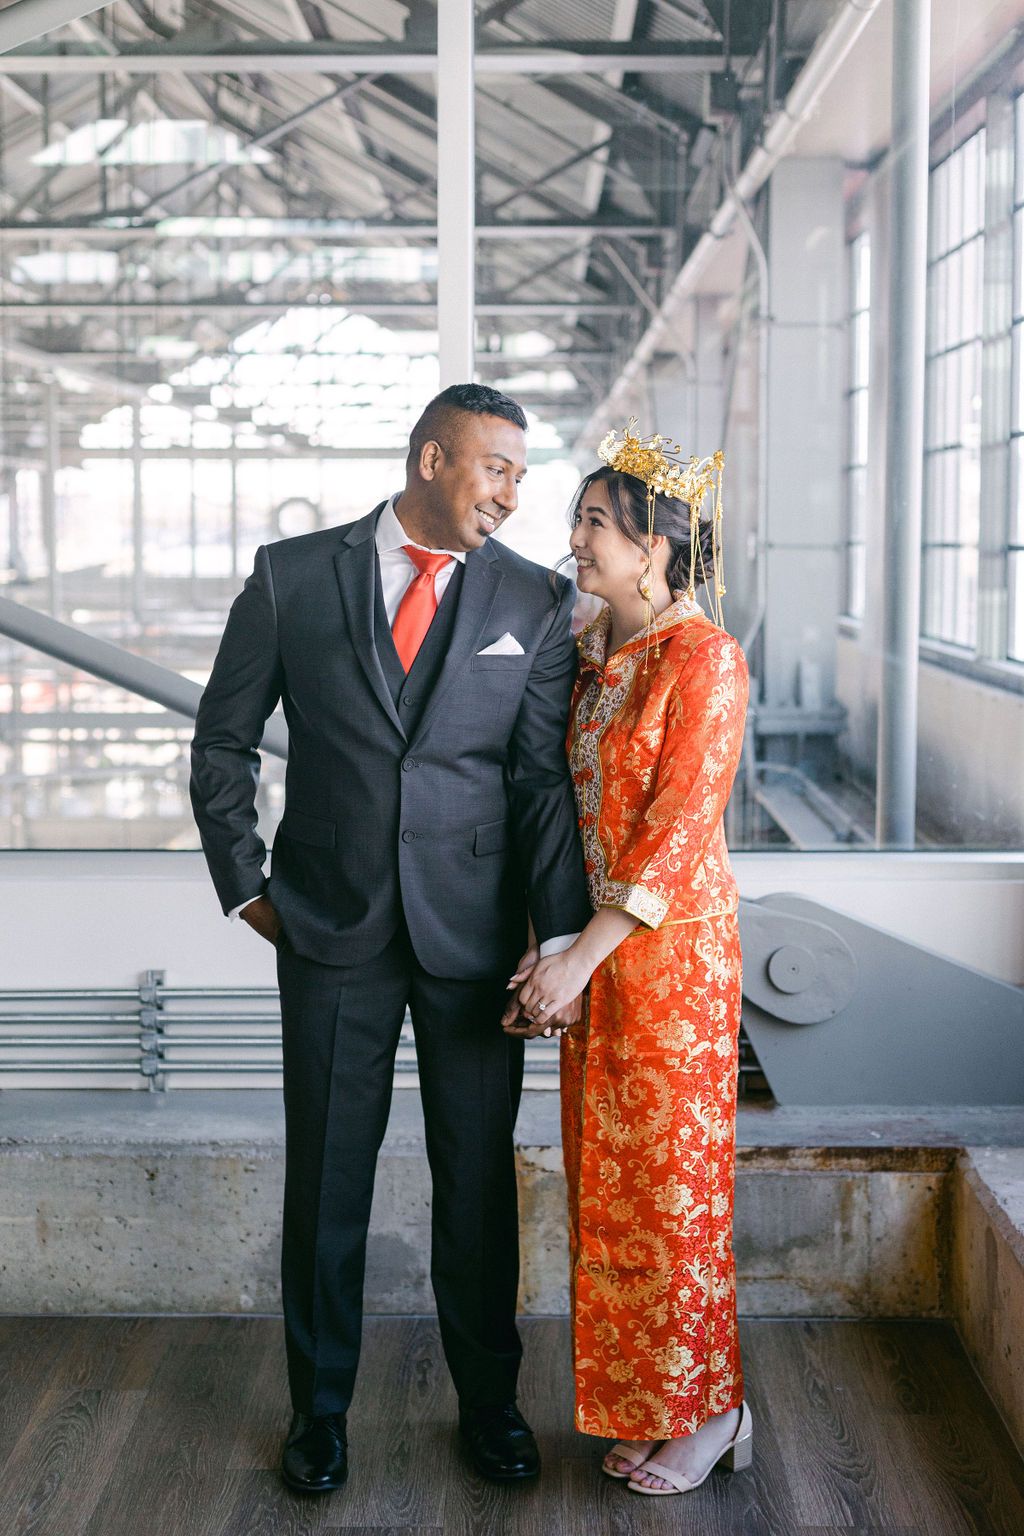 Multicultural wedding inspiration in Vancouver, bride and groom attire with bright red accents